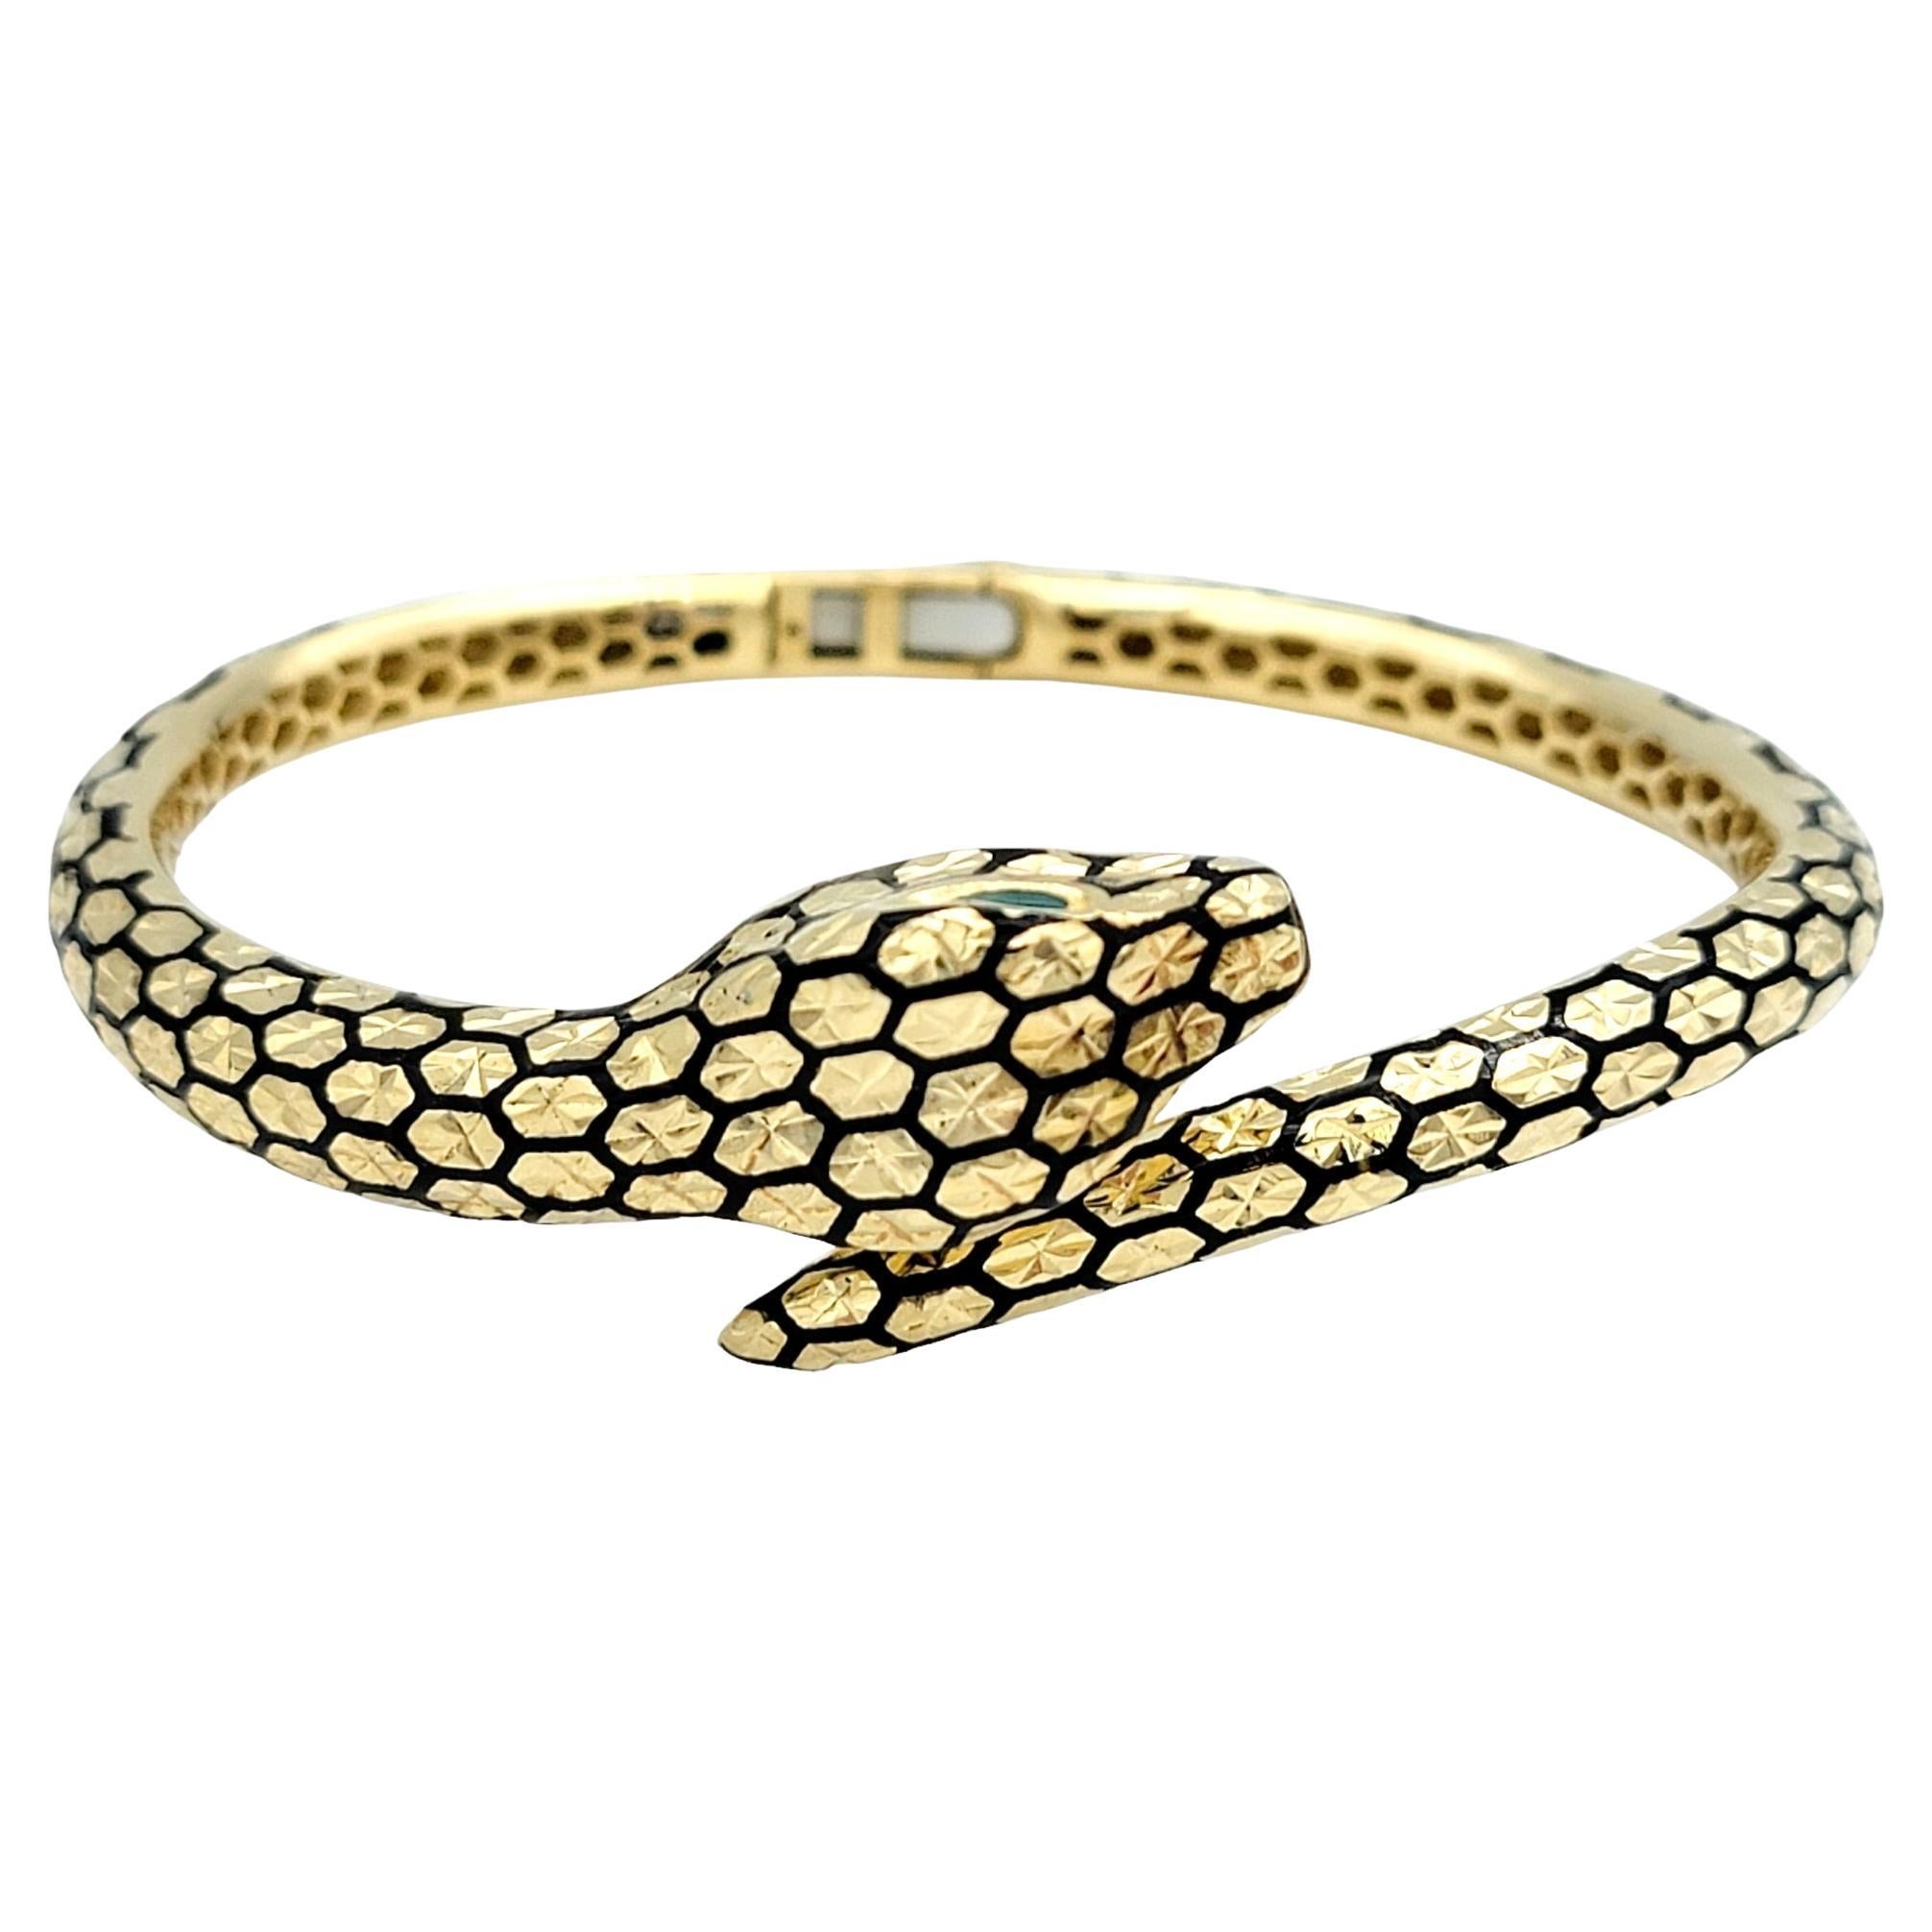 The inner circumference of this bracelet measures 6.75 inches and will comfortably fit a 6 - 6.5 inch wrist. 

This 14 karat gold bypass style hinged bangle is a true marvel of artistry, exuding a sense of mystique and bold elegance. Crafted in the